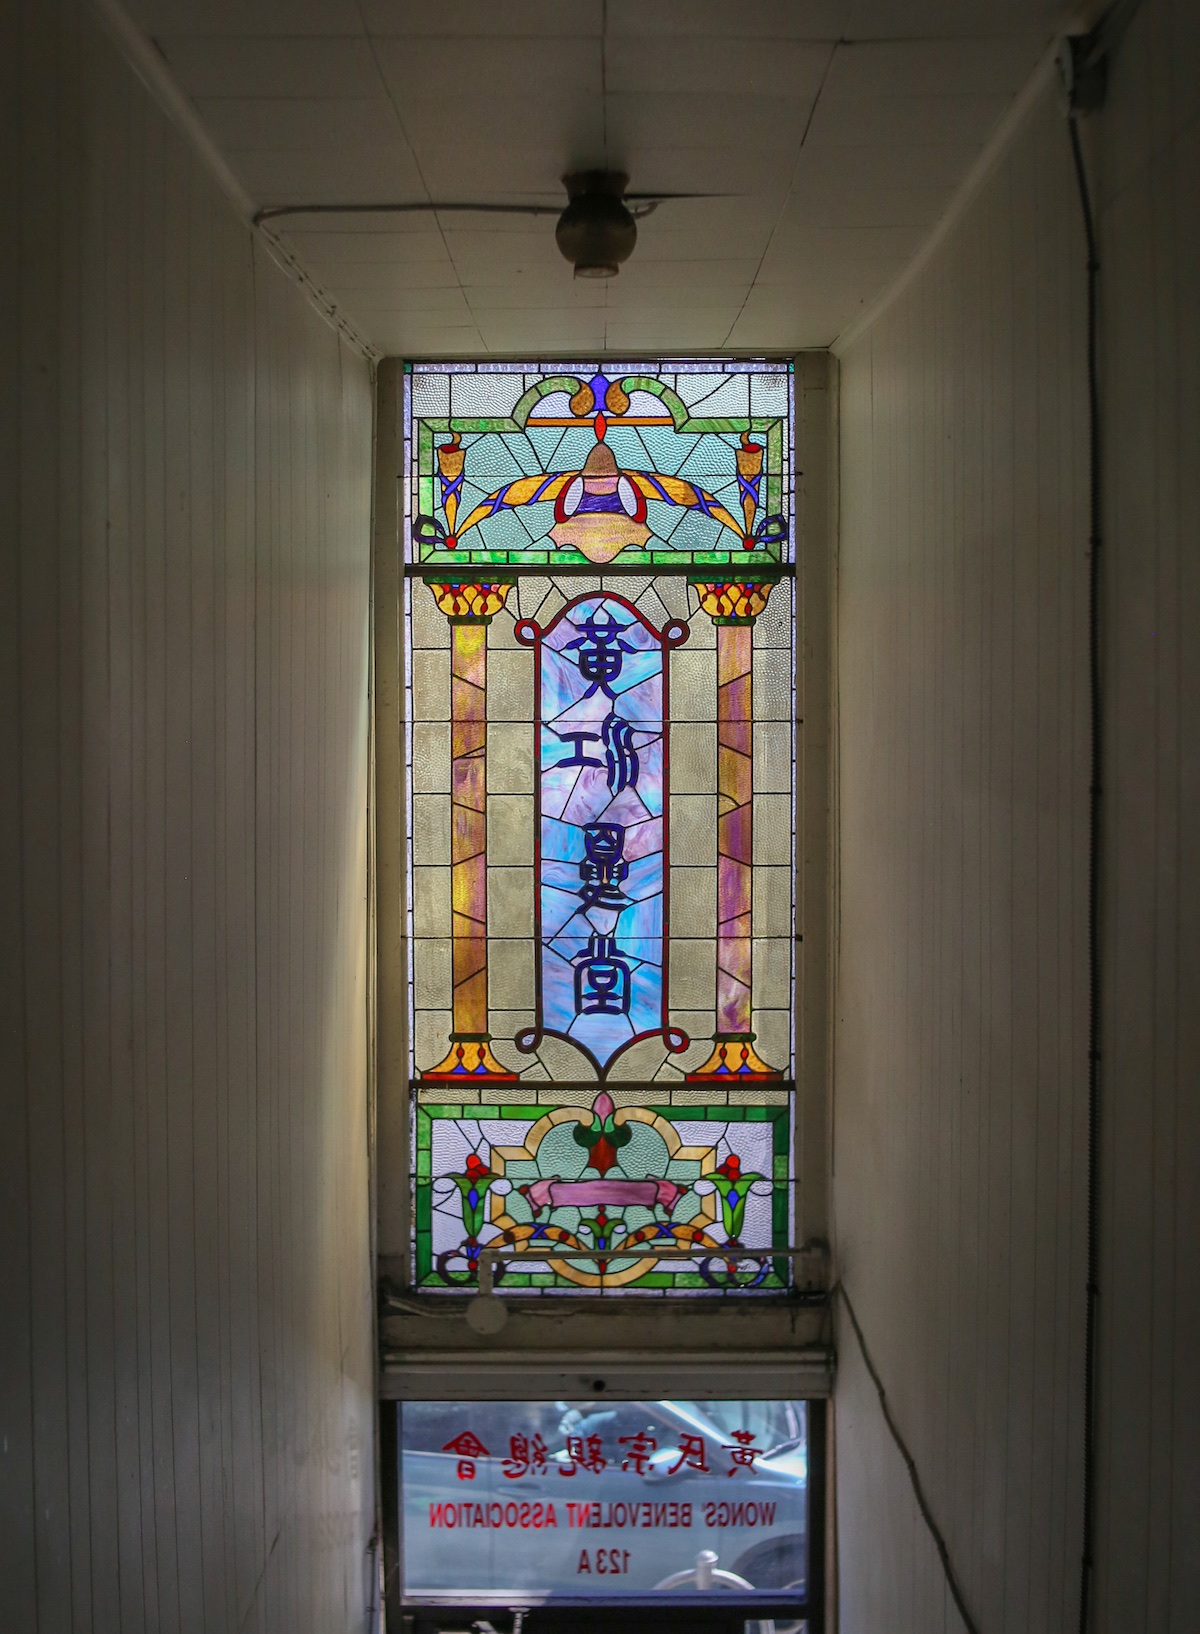 A colourful stained glass window with stylized Chinese characters in the centre, seen from the inside of a building.